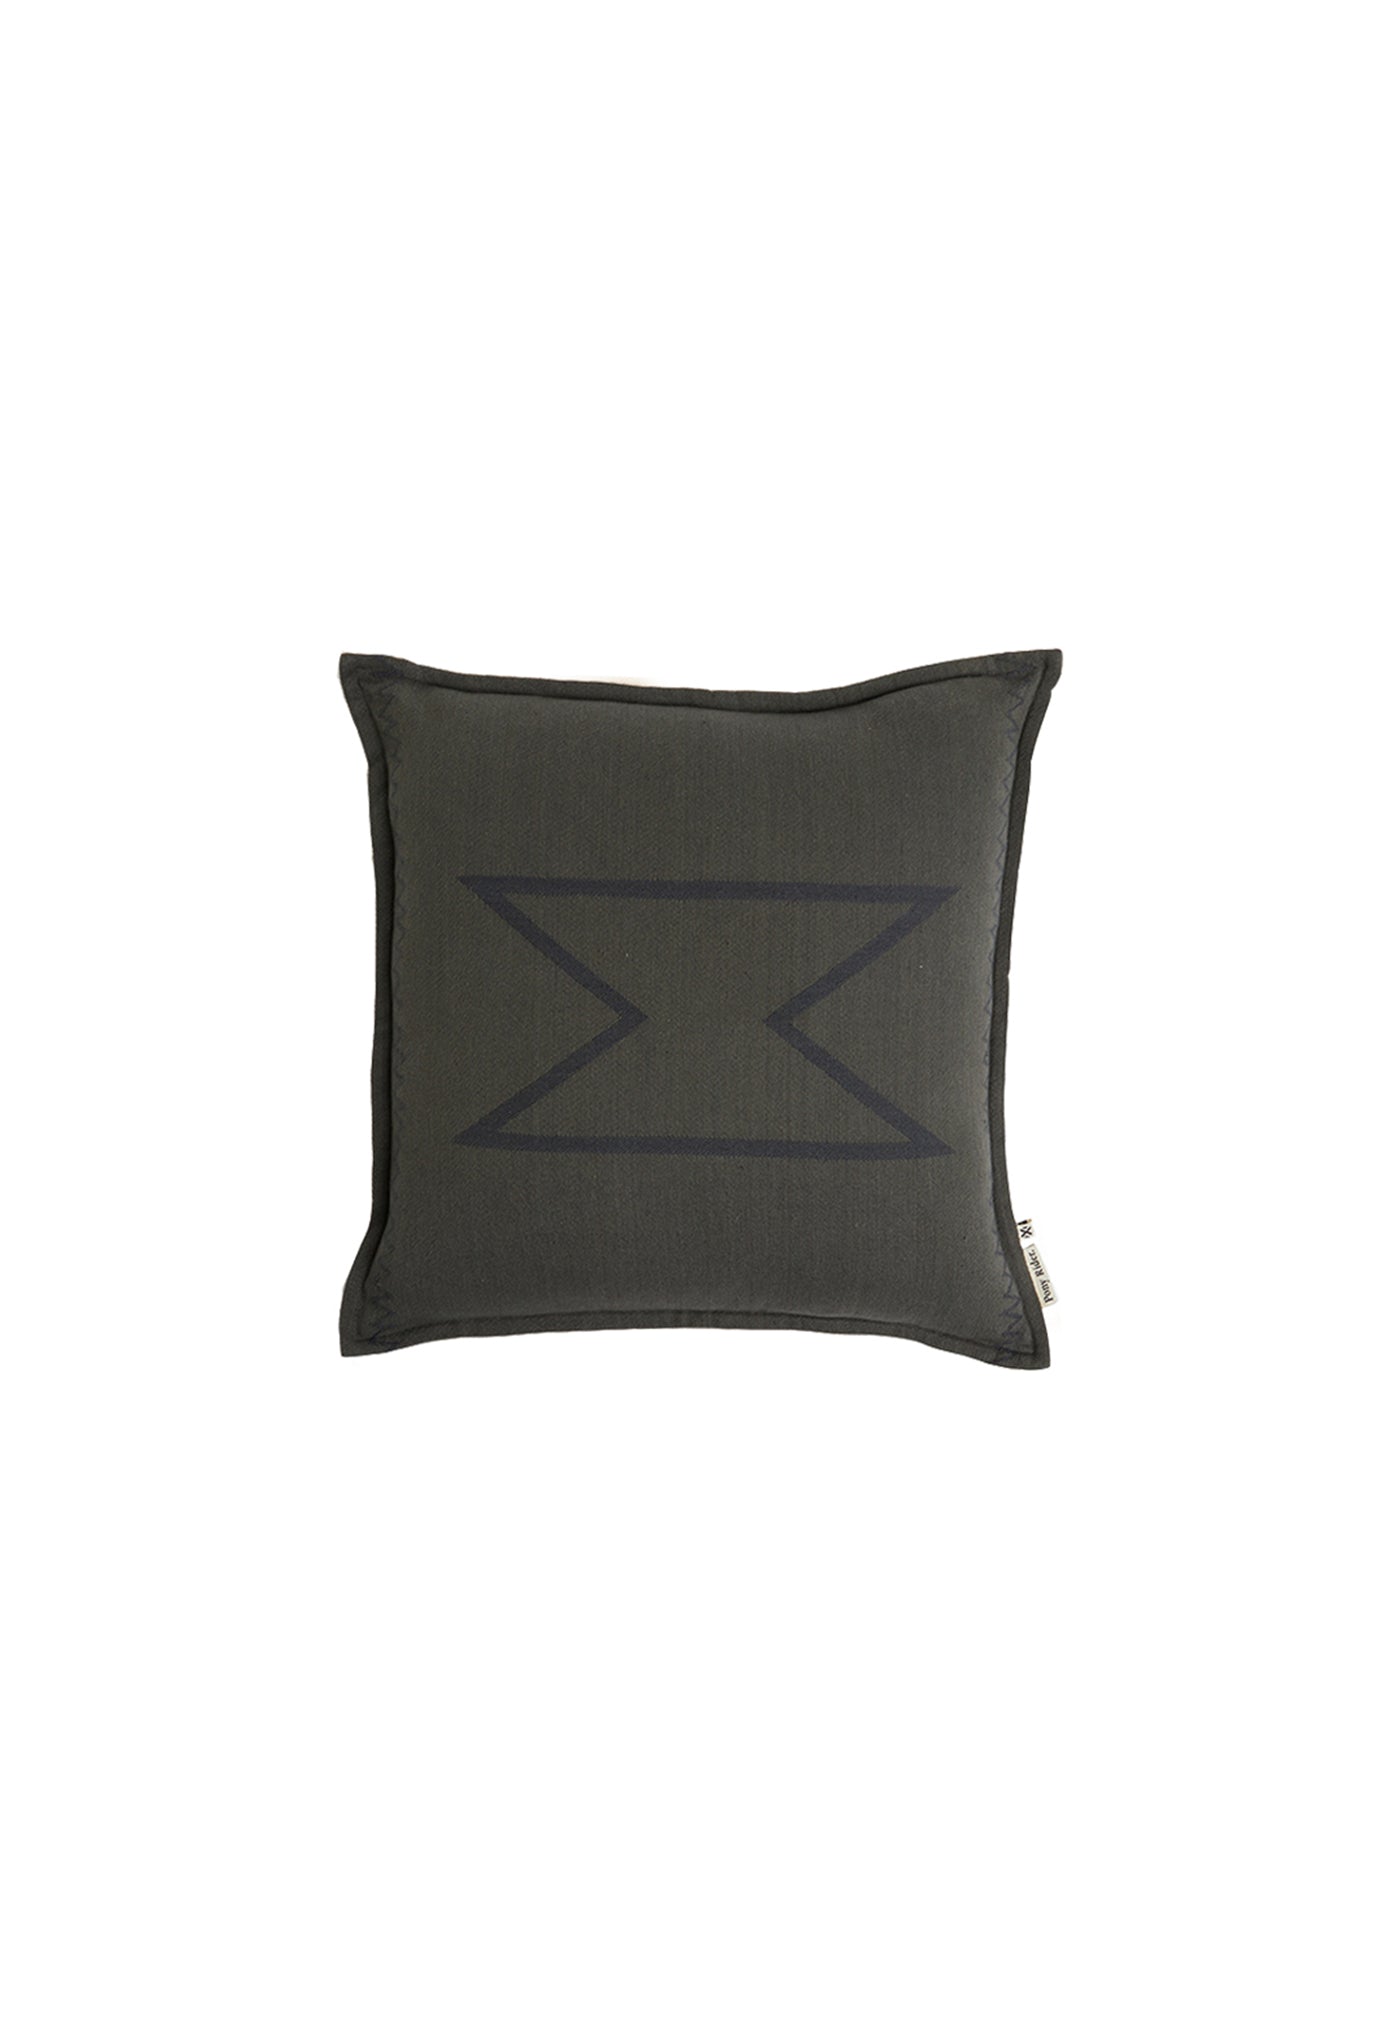 Pony Rider - Haymaker Cushion Cover - Forest Green sold by Angel Divine